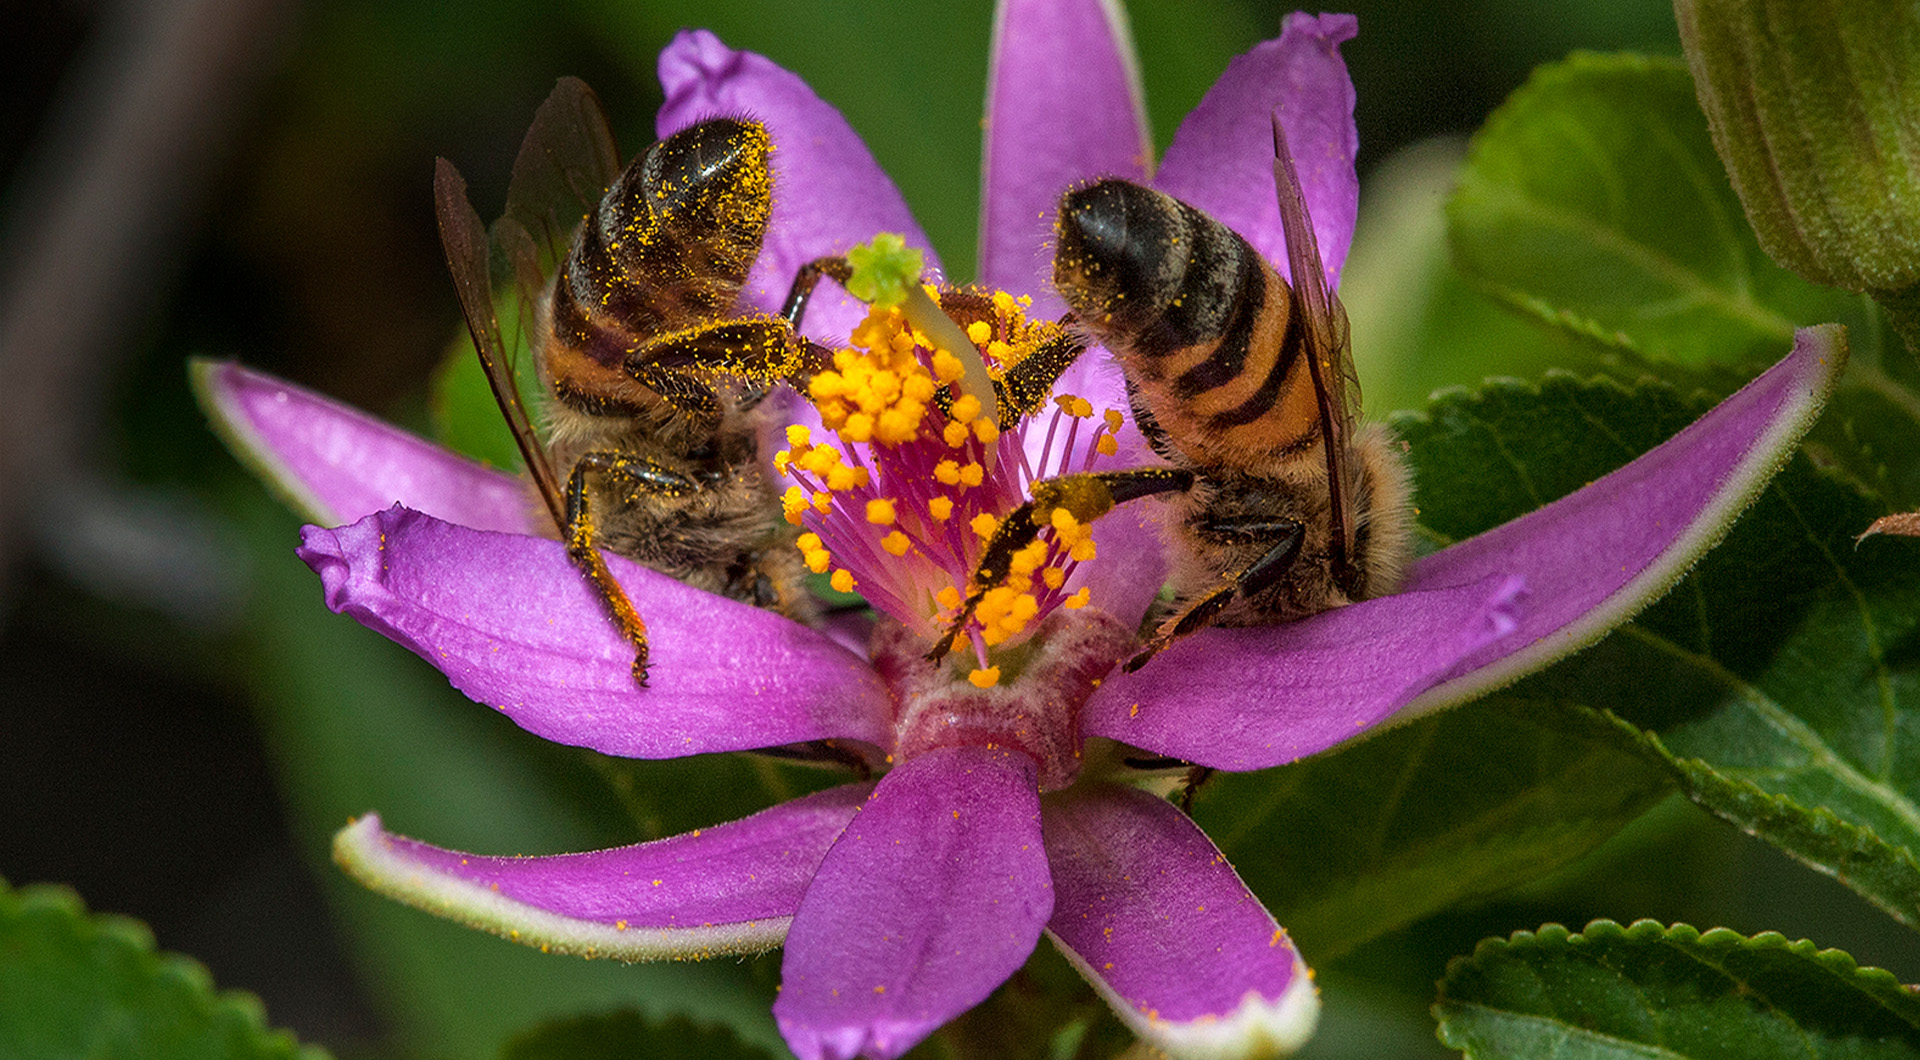 Two bees pollinating a large purple flower